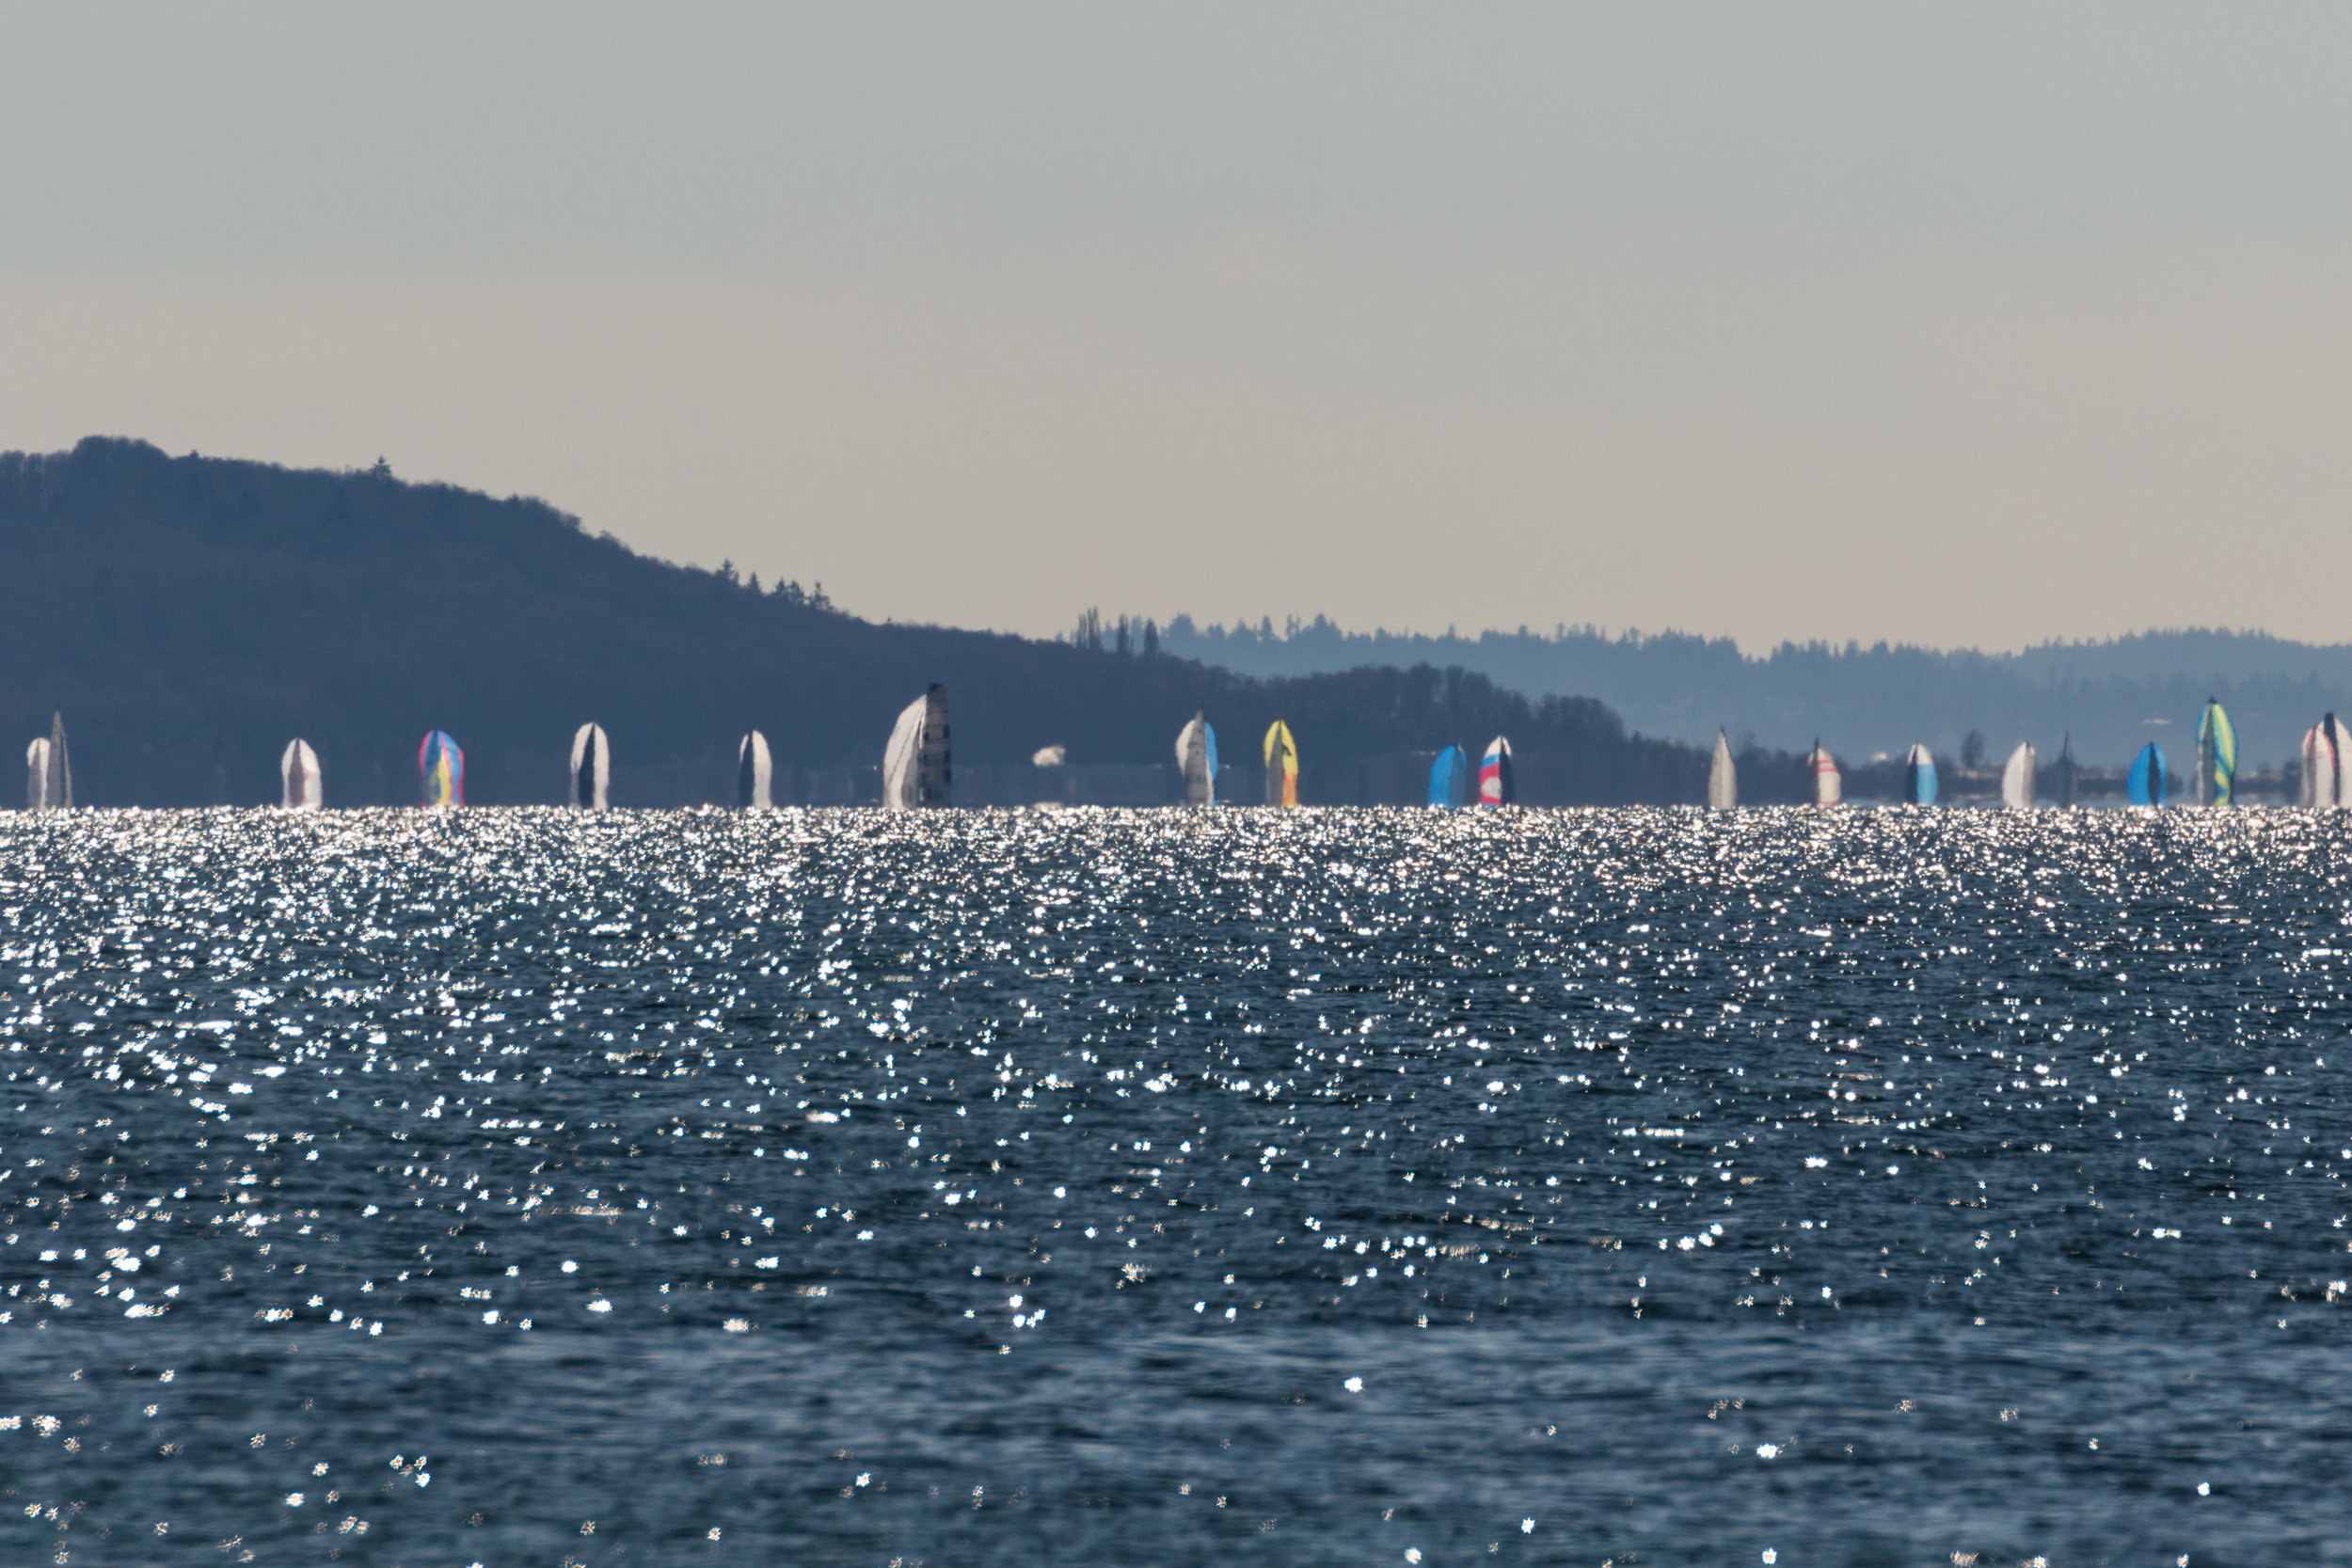 Sailboats in Puget Sound